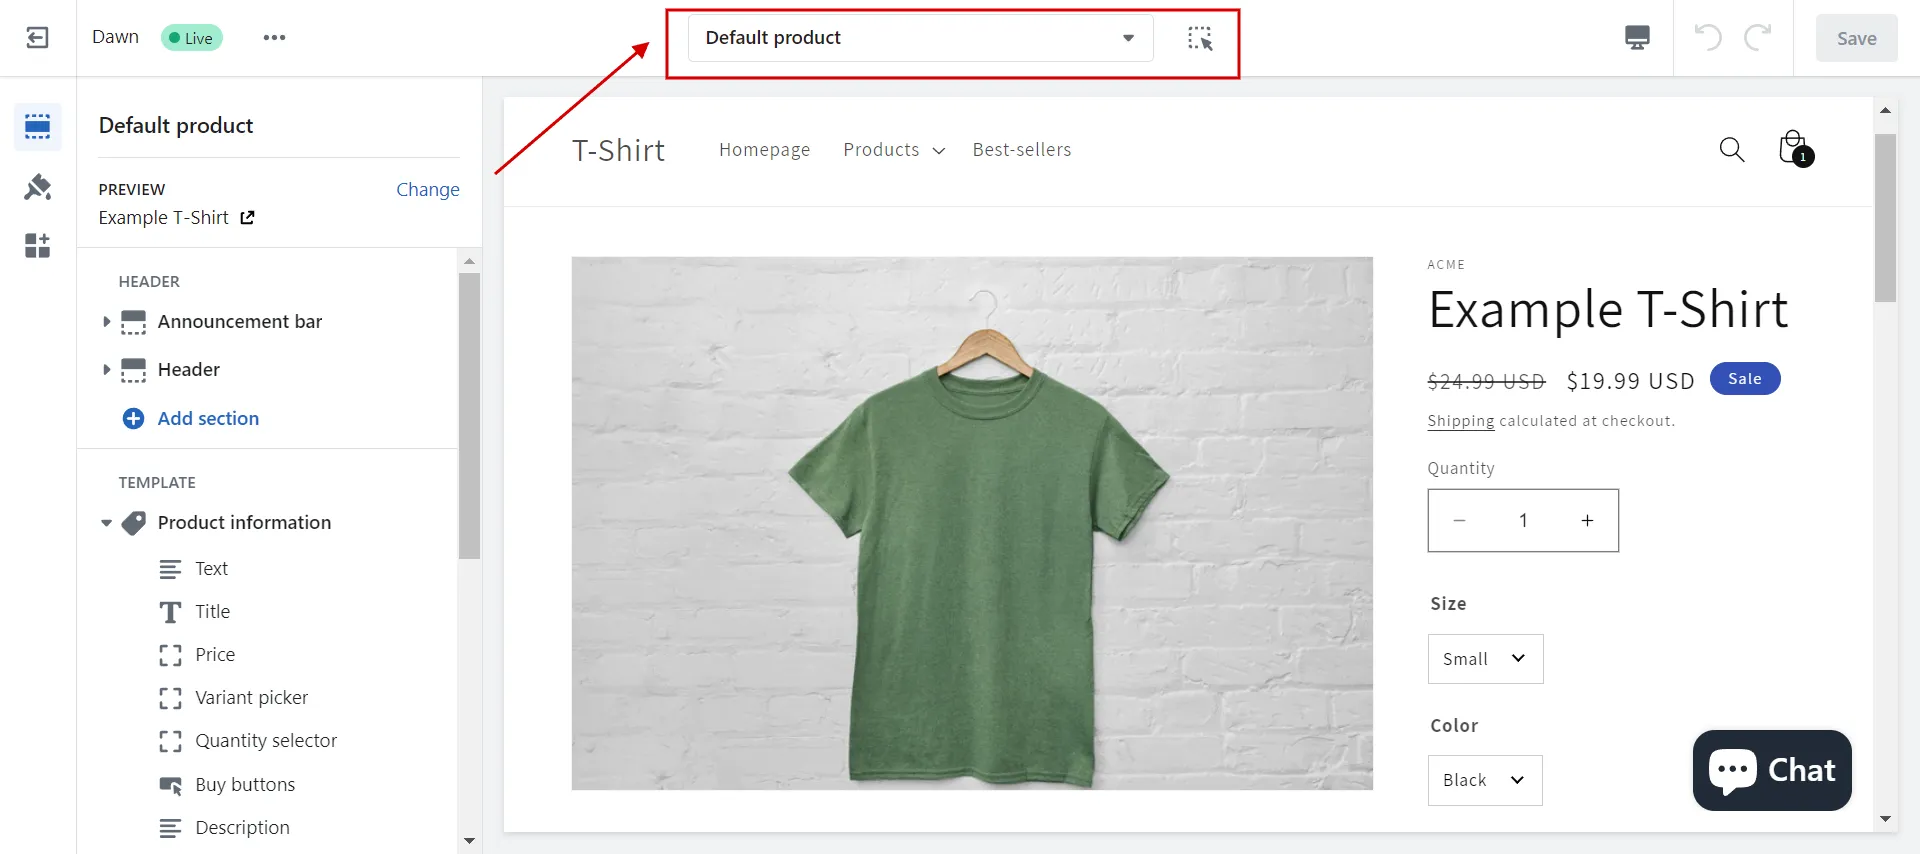 Navigate to your product page.